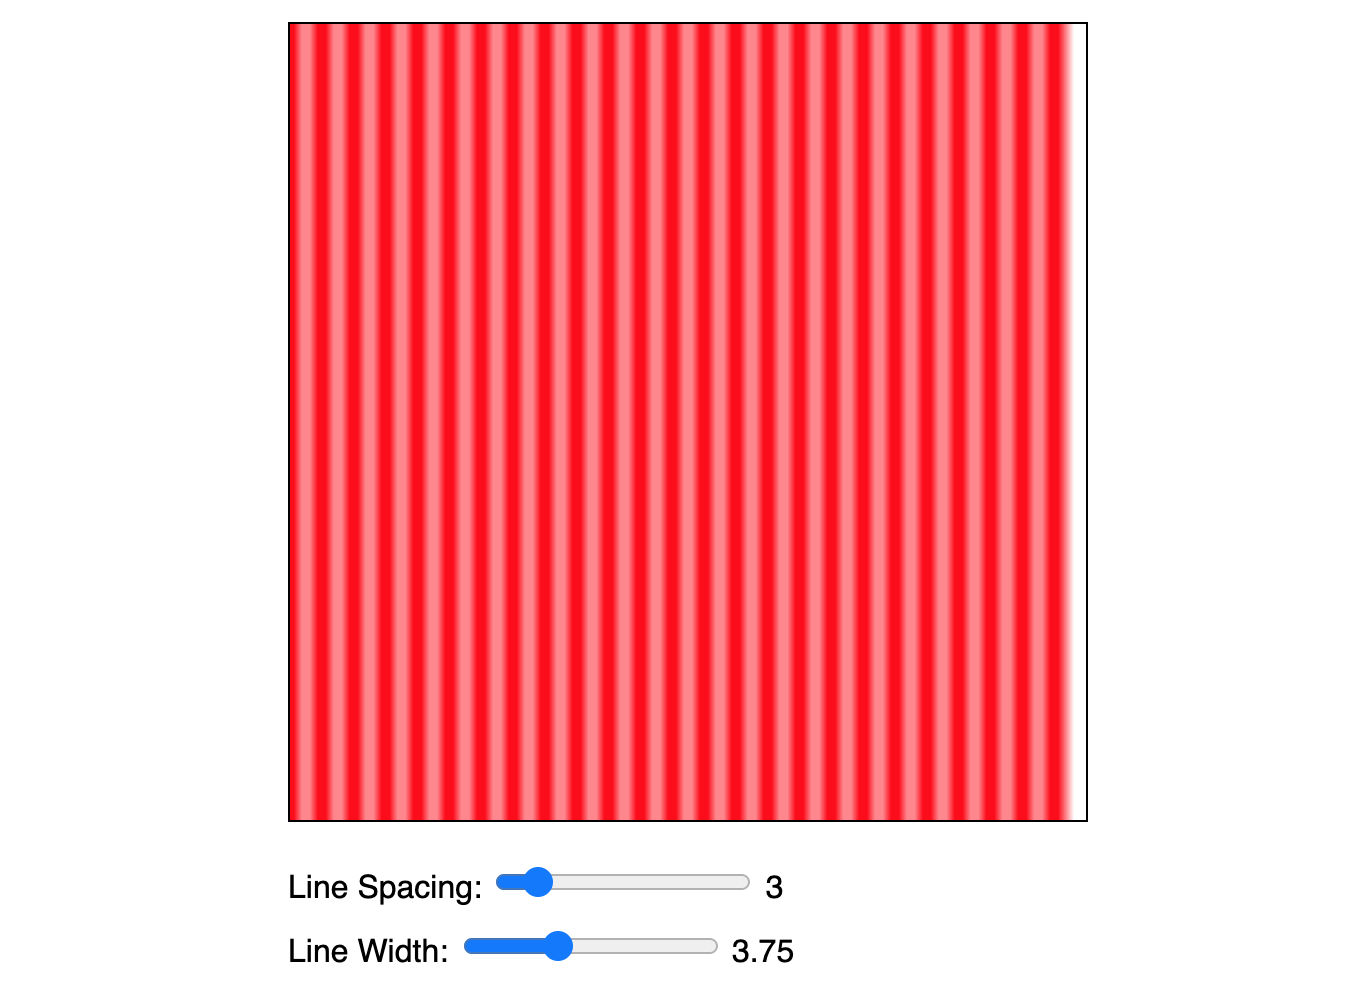 A screenshot from my slides on drawing pixel perfect lines on the JS canvas